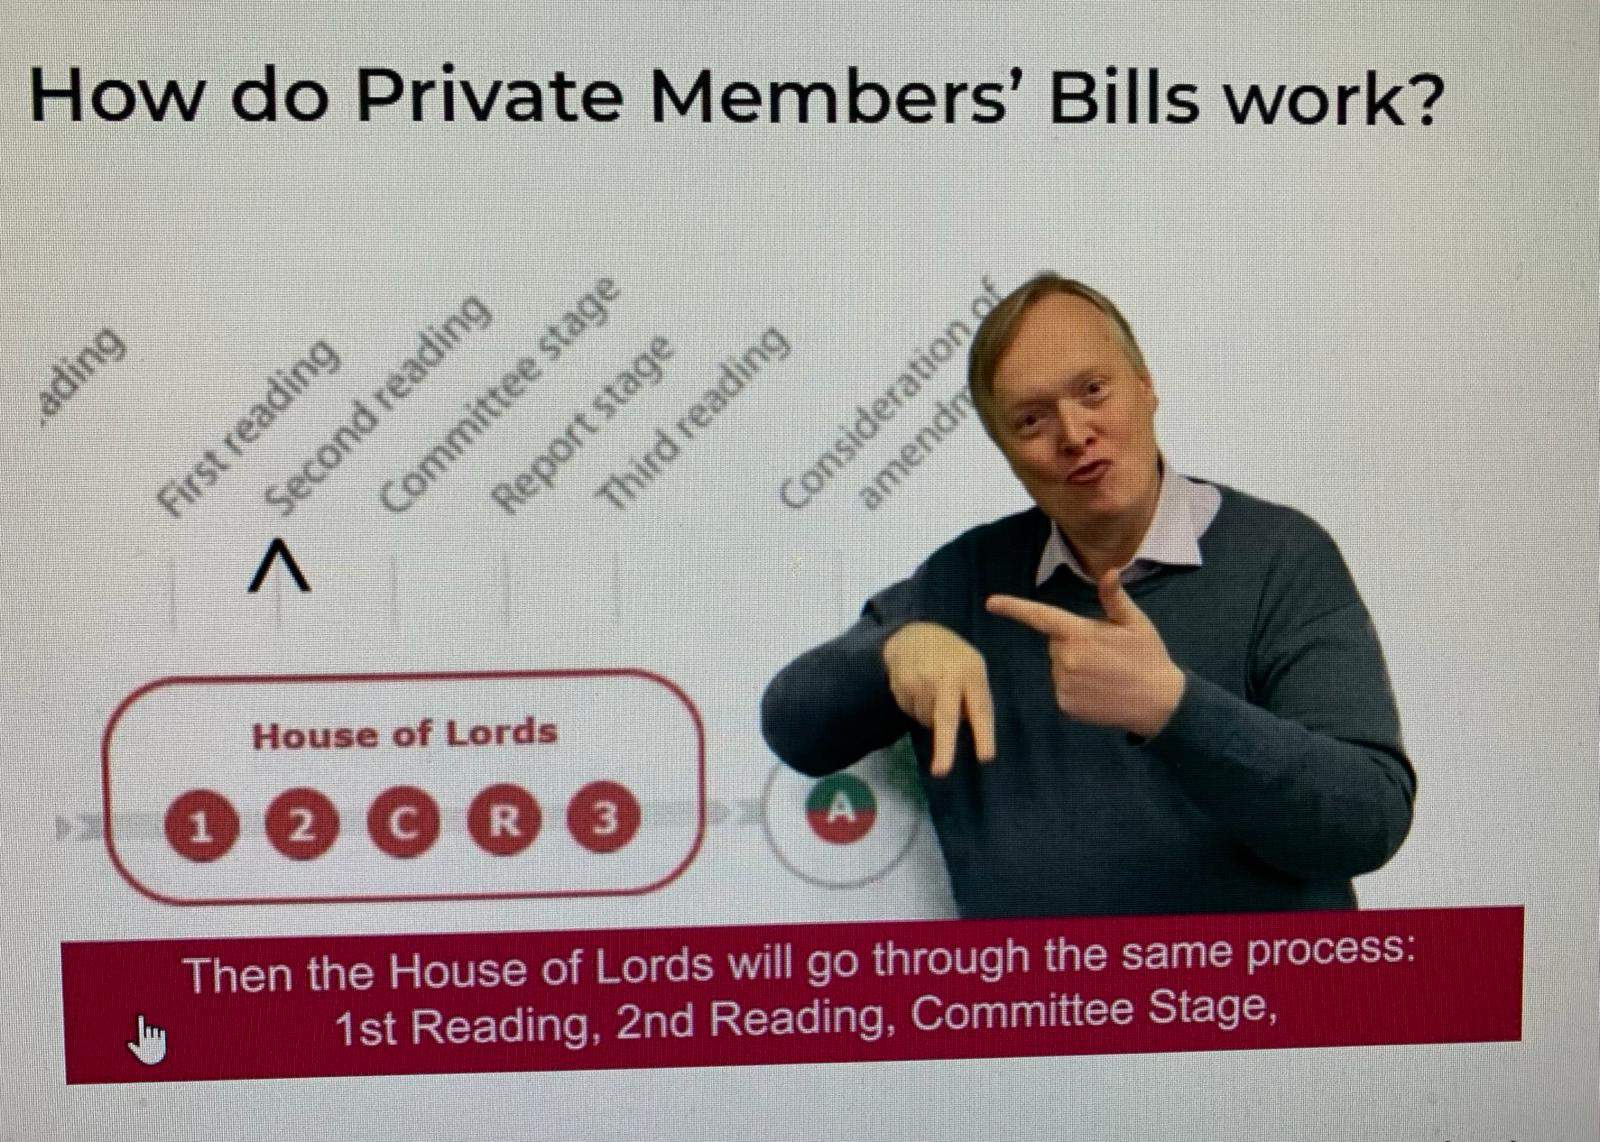 Man presenting a flowchart explaining the stages of how private members' bills work in the house of lords.